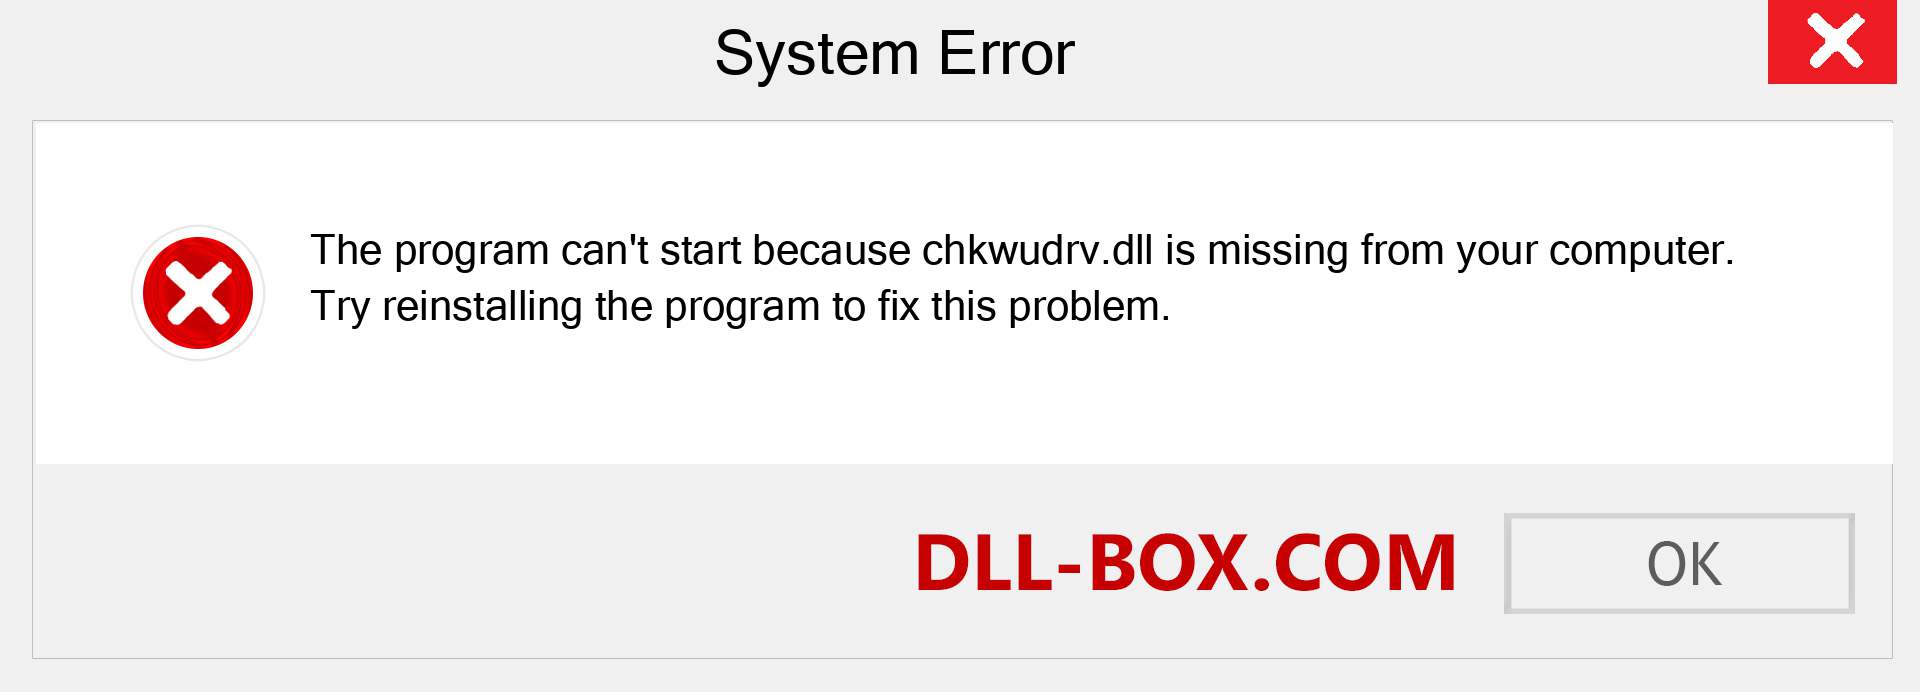  chkwudrv.dll file is missing?. Download for Windows 7, 8, 10 - Fix  chkwudrv dll Missing Error on Windows, photos, images